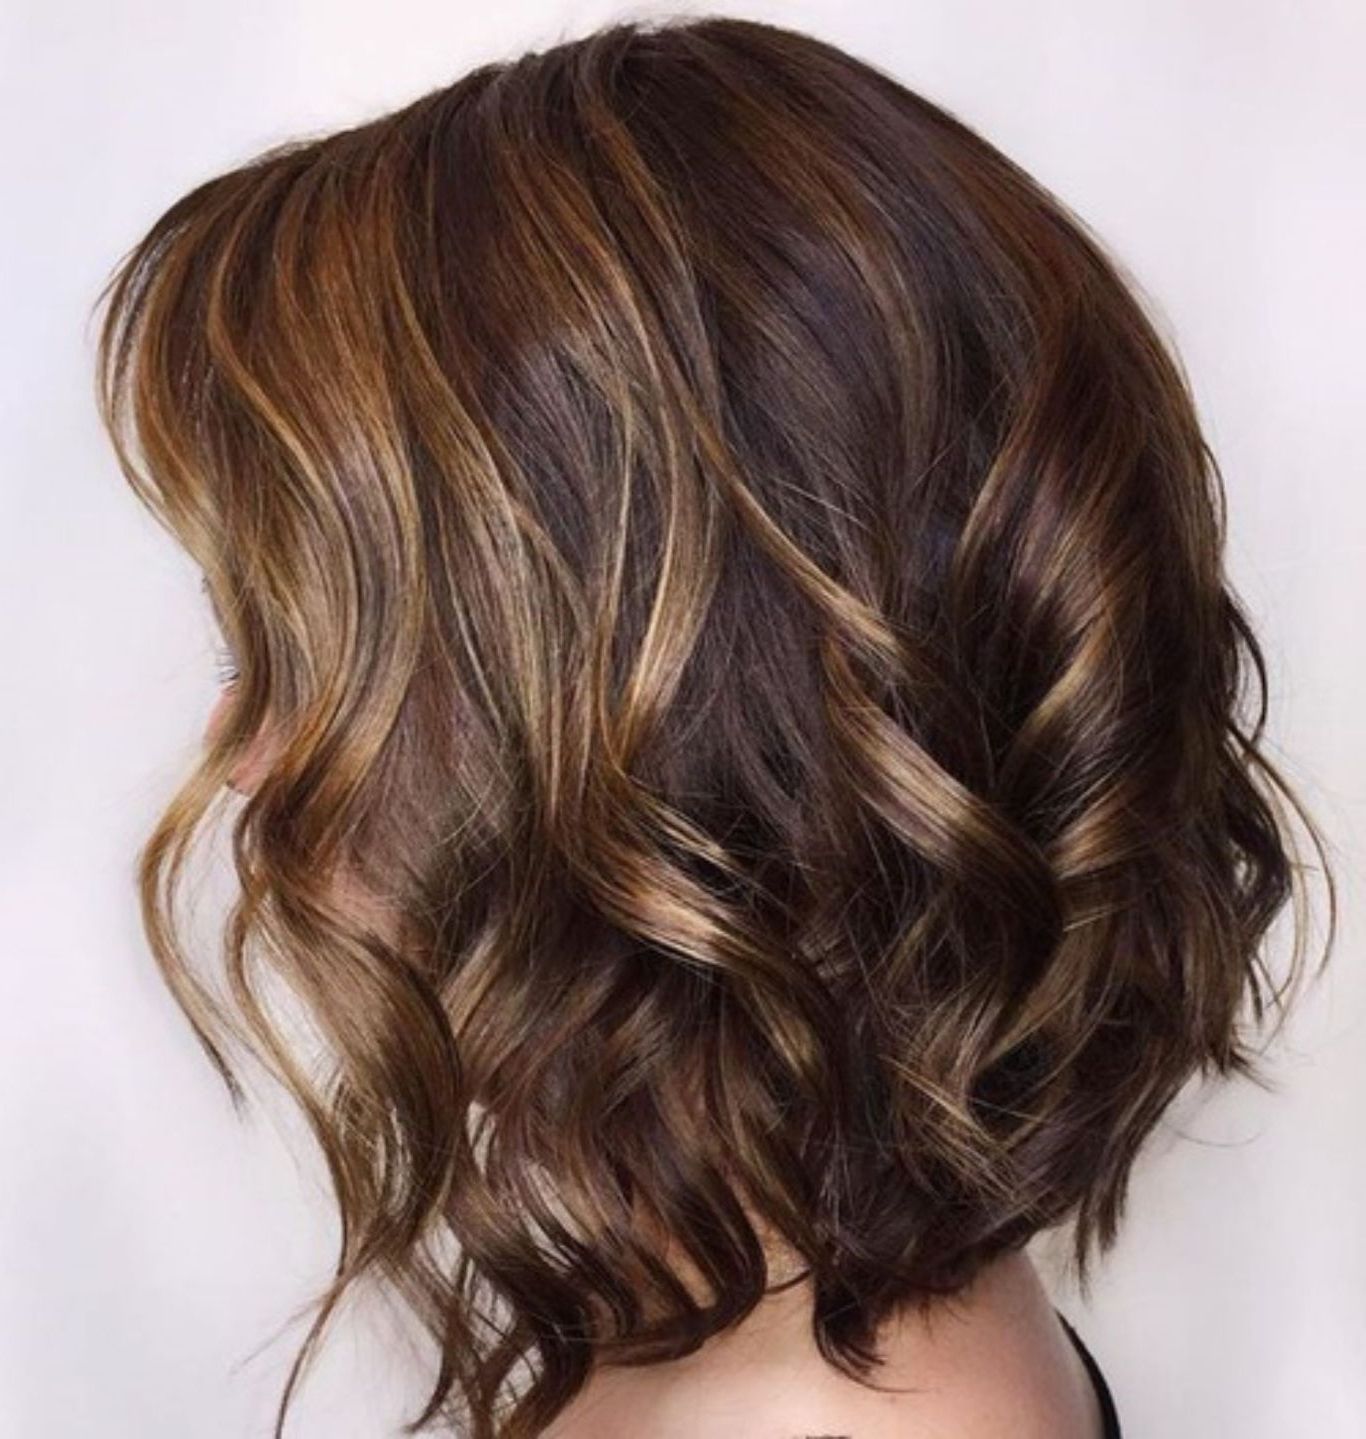 Popular Honey Kissed Highlights Curls Hairstyles Inside 60 Looks With Caramel Highlights On Brown And Dark Brown (View 19 of 20)